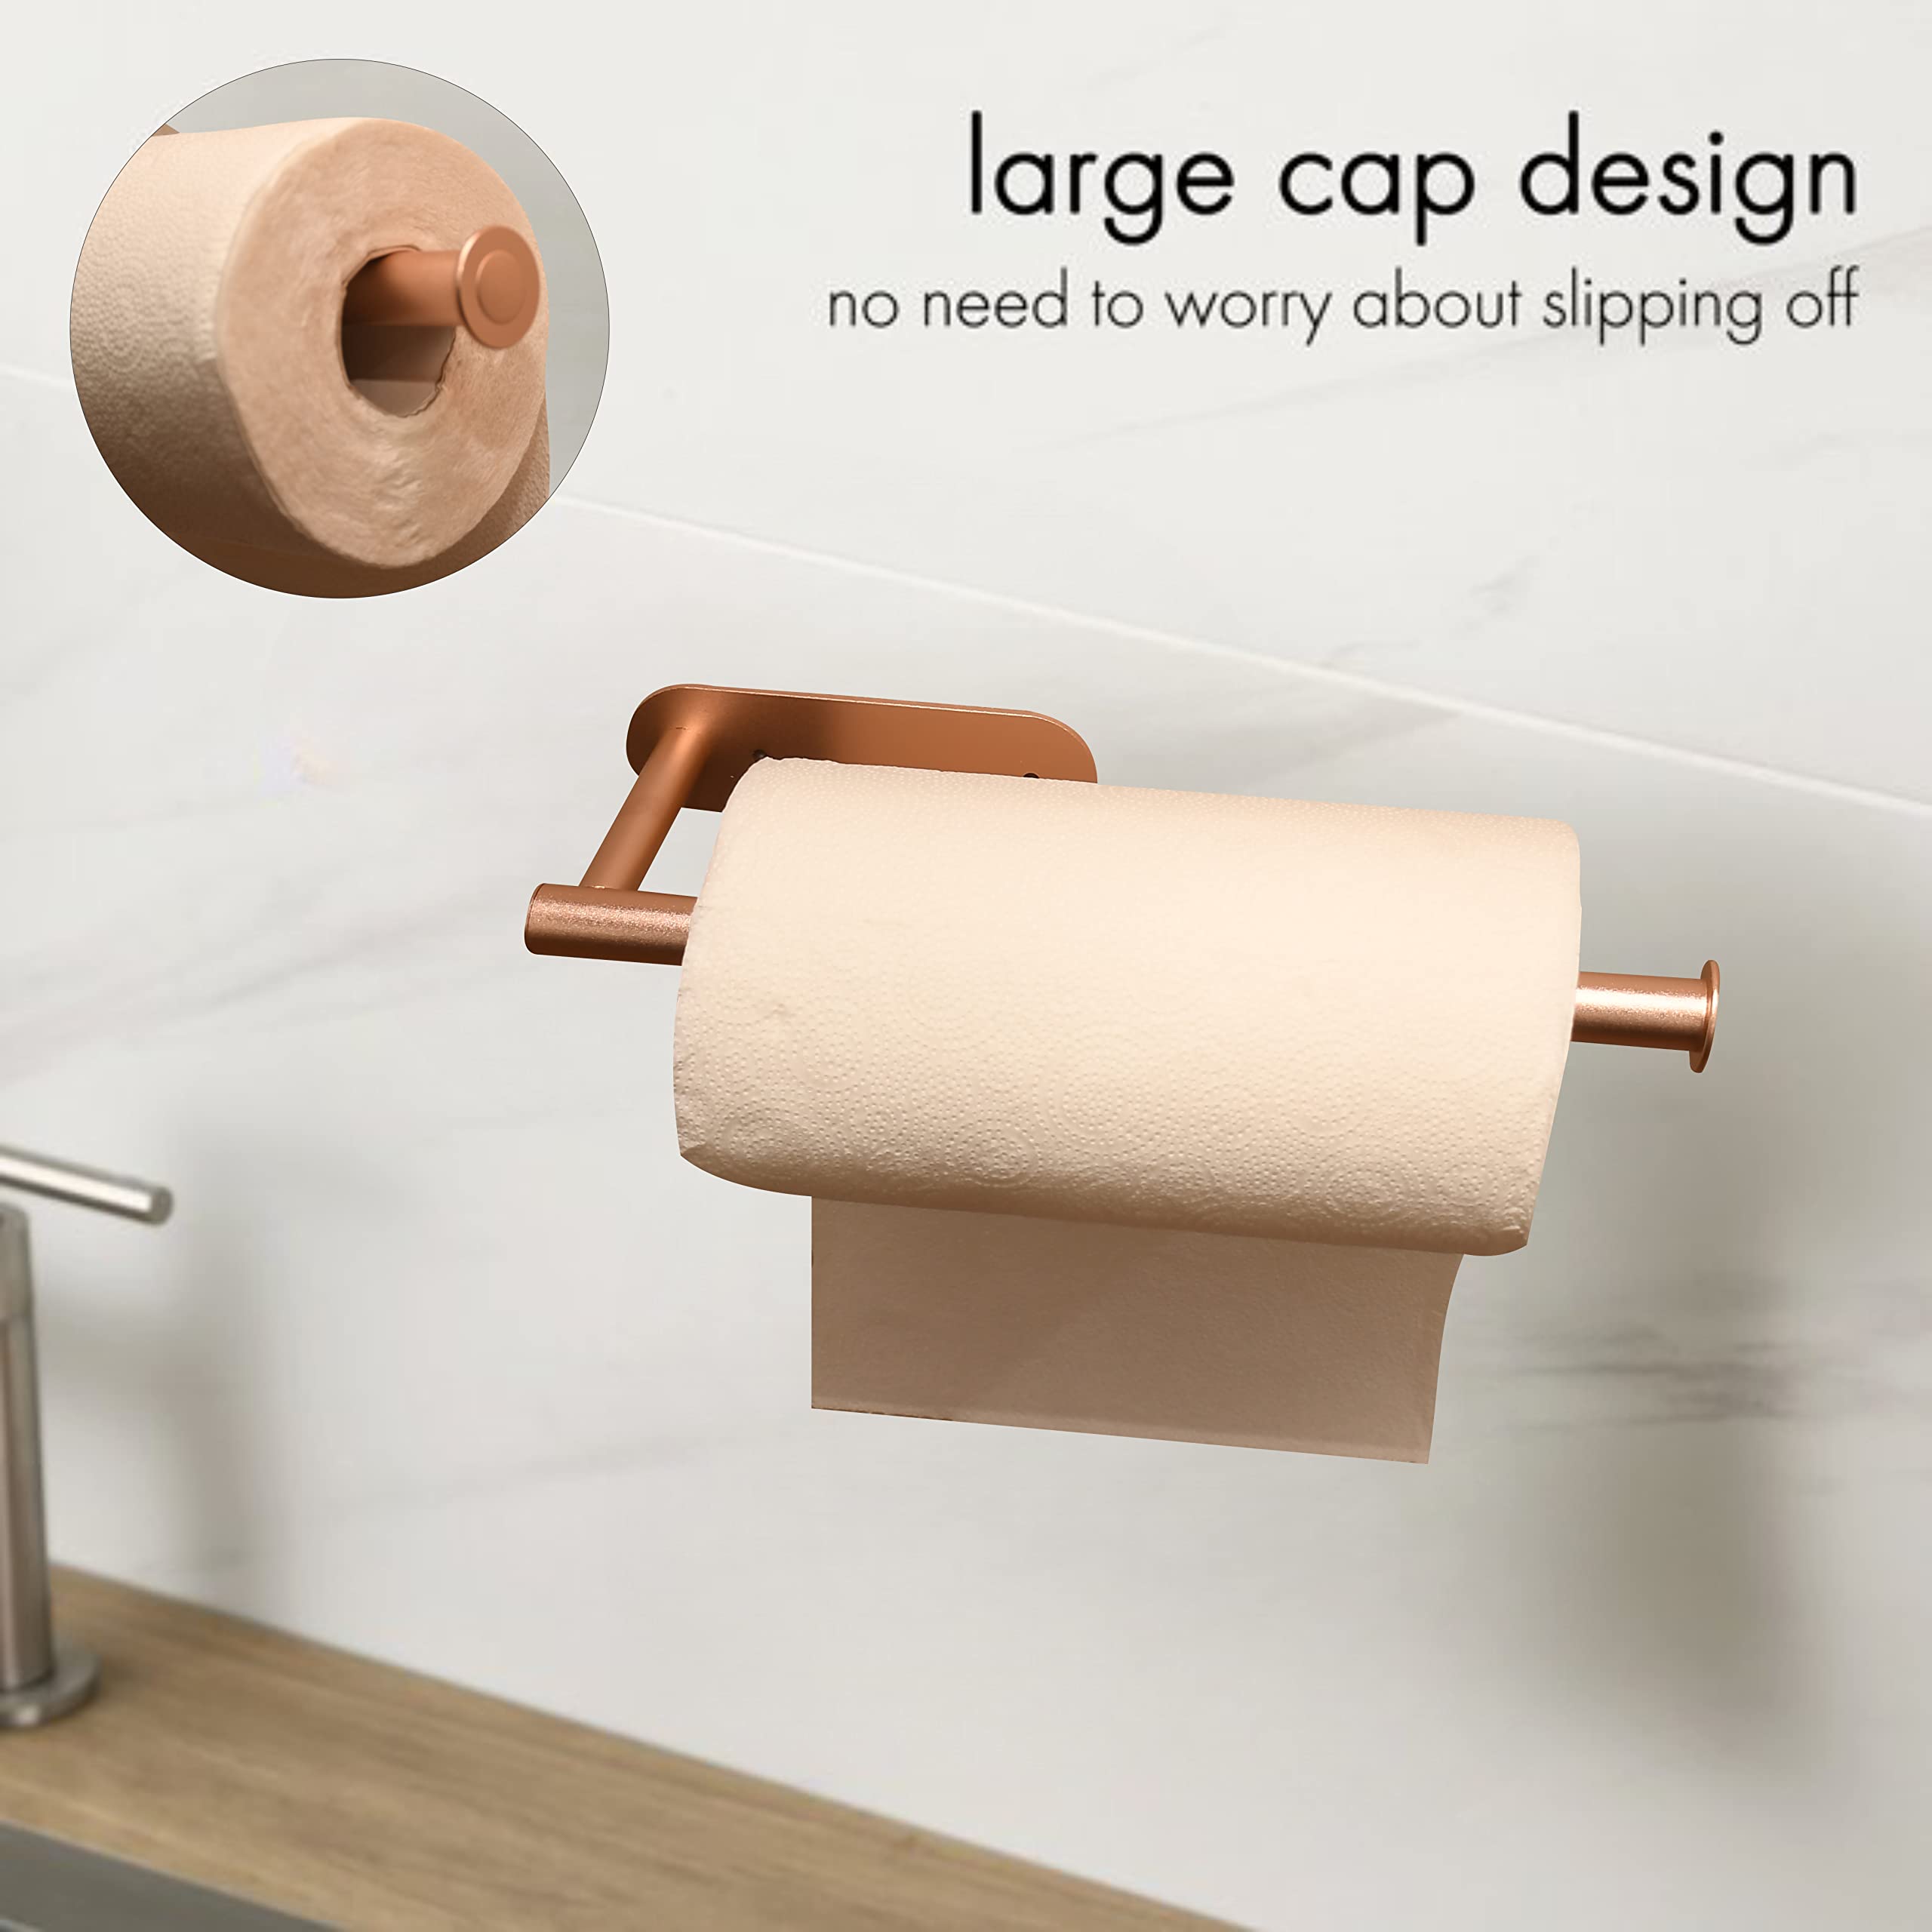 Paper Towel Holder for Kitchen - Drilling Free Wall Mount Paper Towel Holder, Aluminium Paper Towel Rack with Adhesive and Screws, Adhesive Paper Towel Holder Under Cabinet.